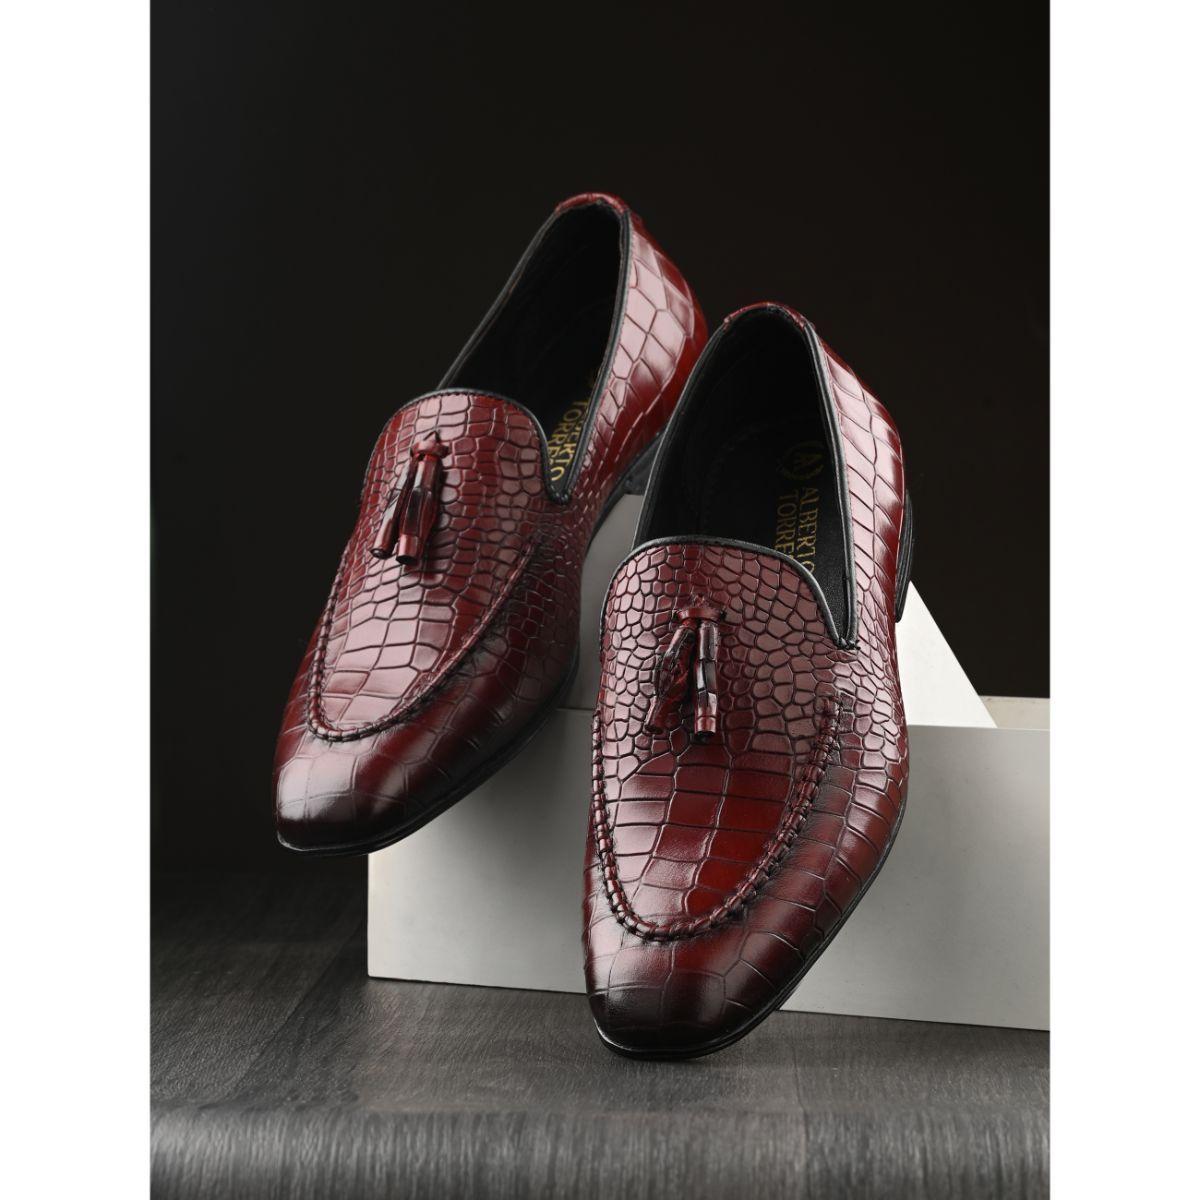 Genuine Leather Tasseled Textured Casual Shoes- Burgundy